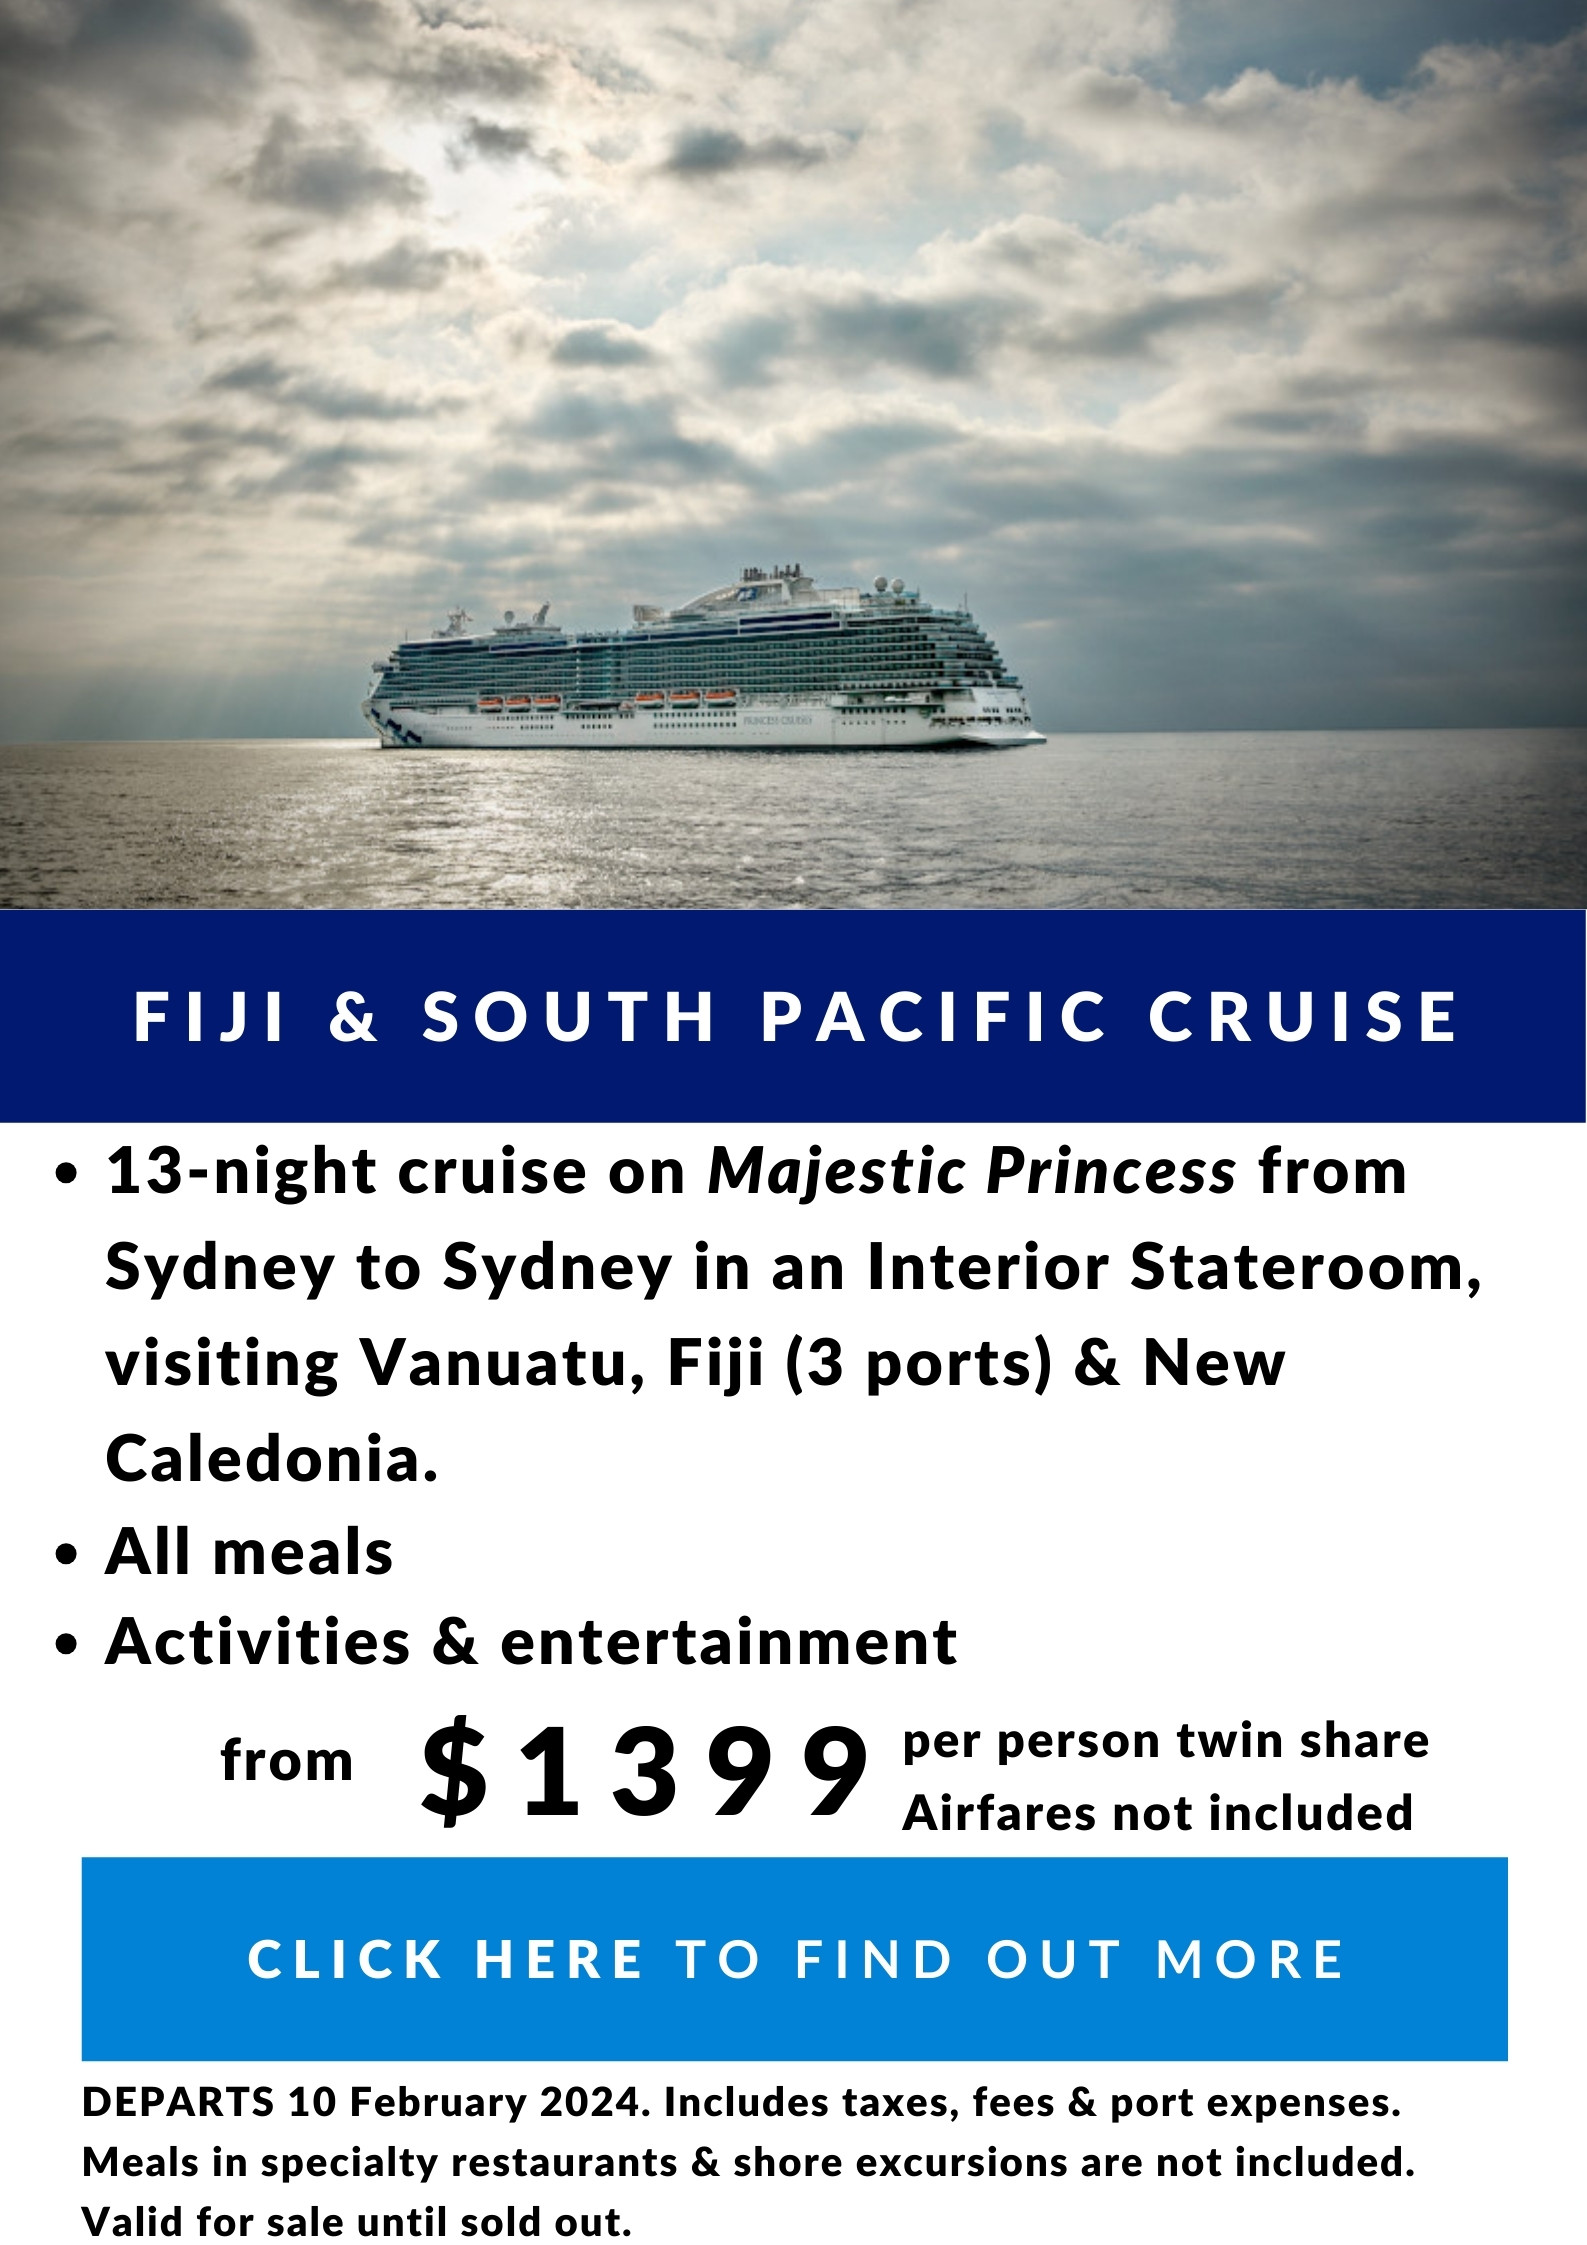 From $1399 per person twin share